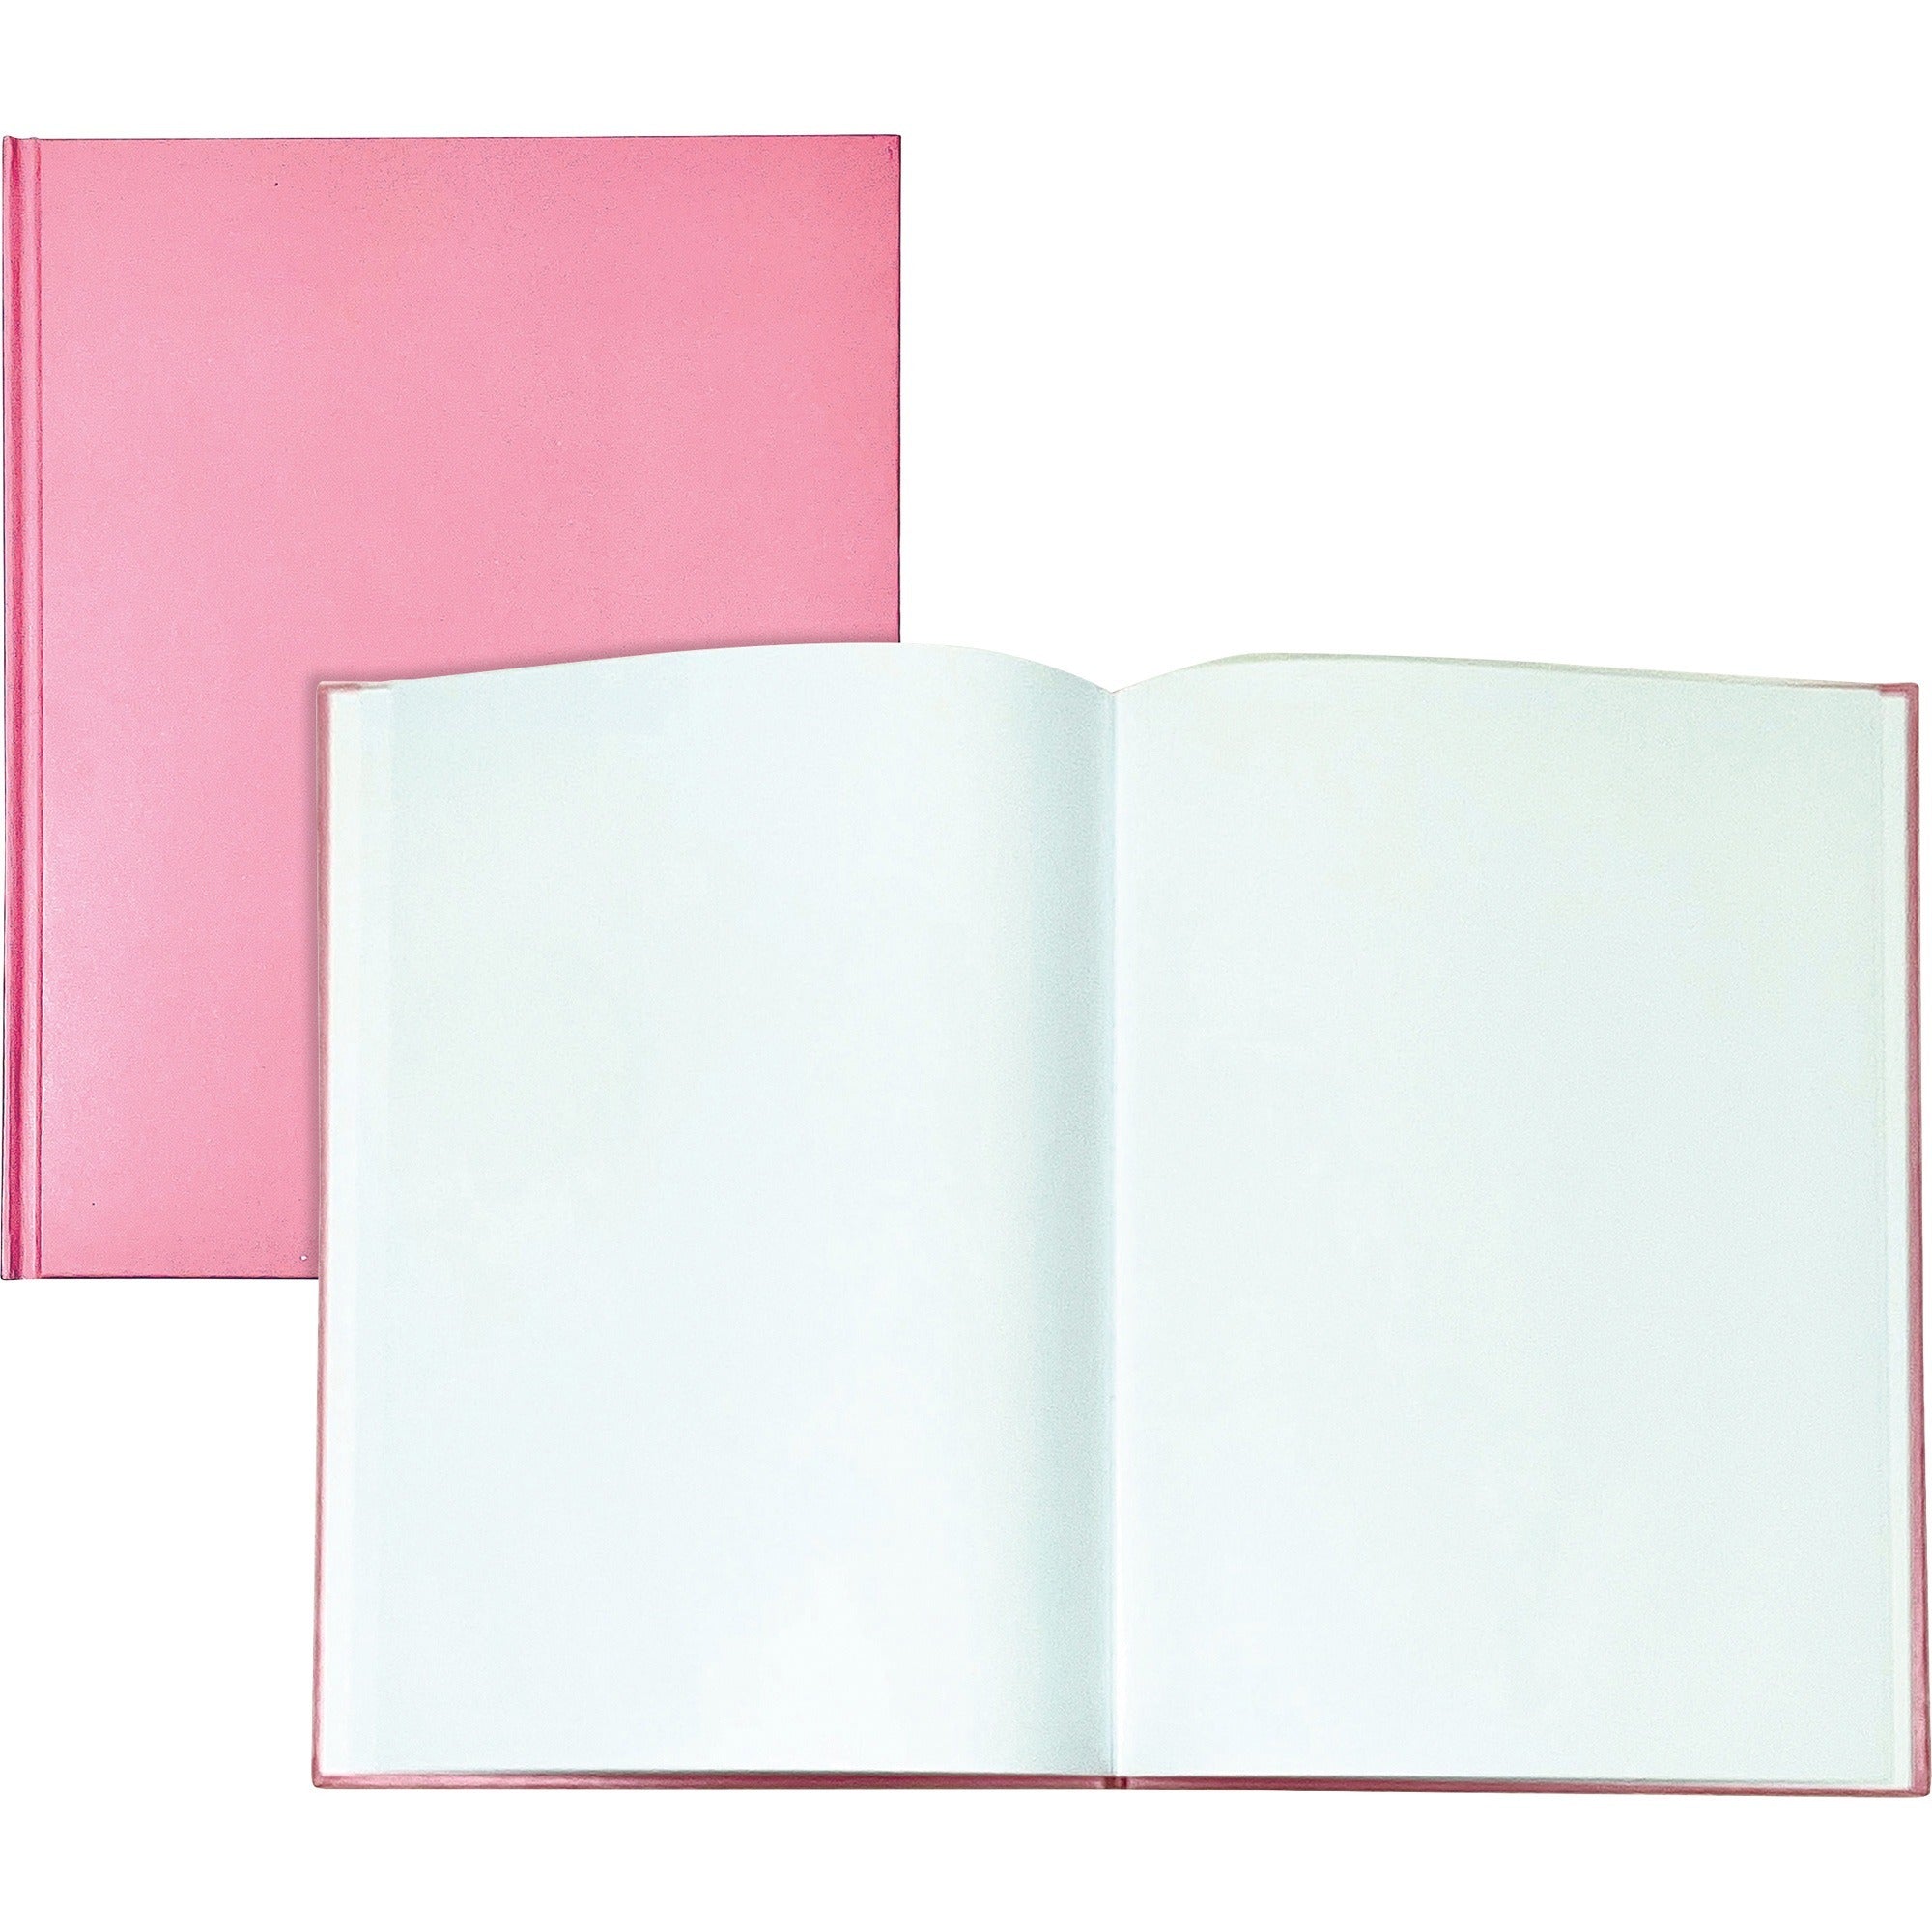 ashley-hardcover-blank-book-28-pages-letter-8-1-2-x-11-pink-cover-hard-cover-durable-1-each_ash10715 - 1